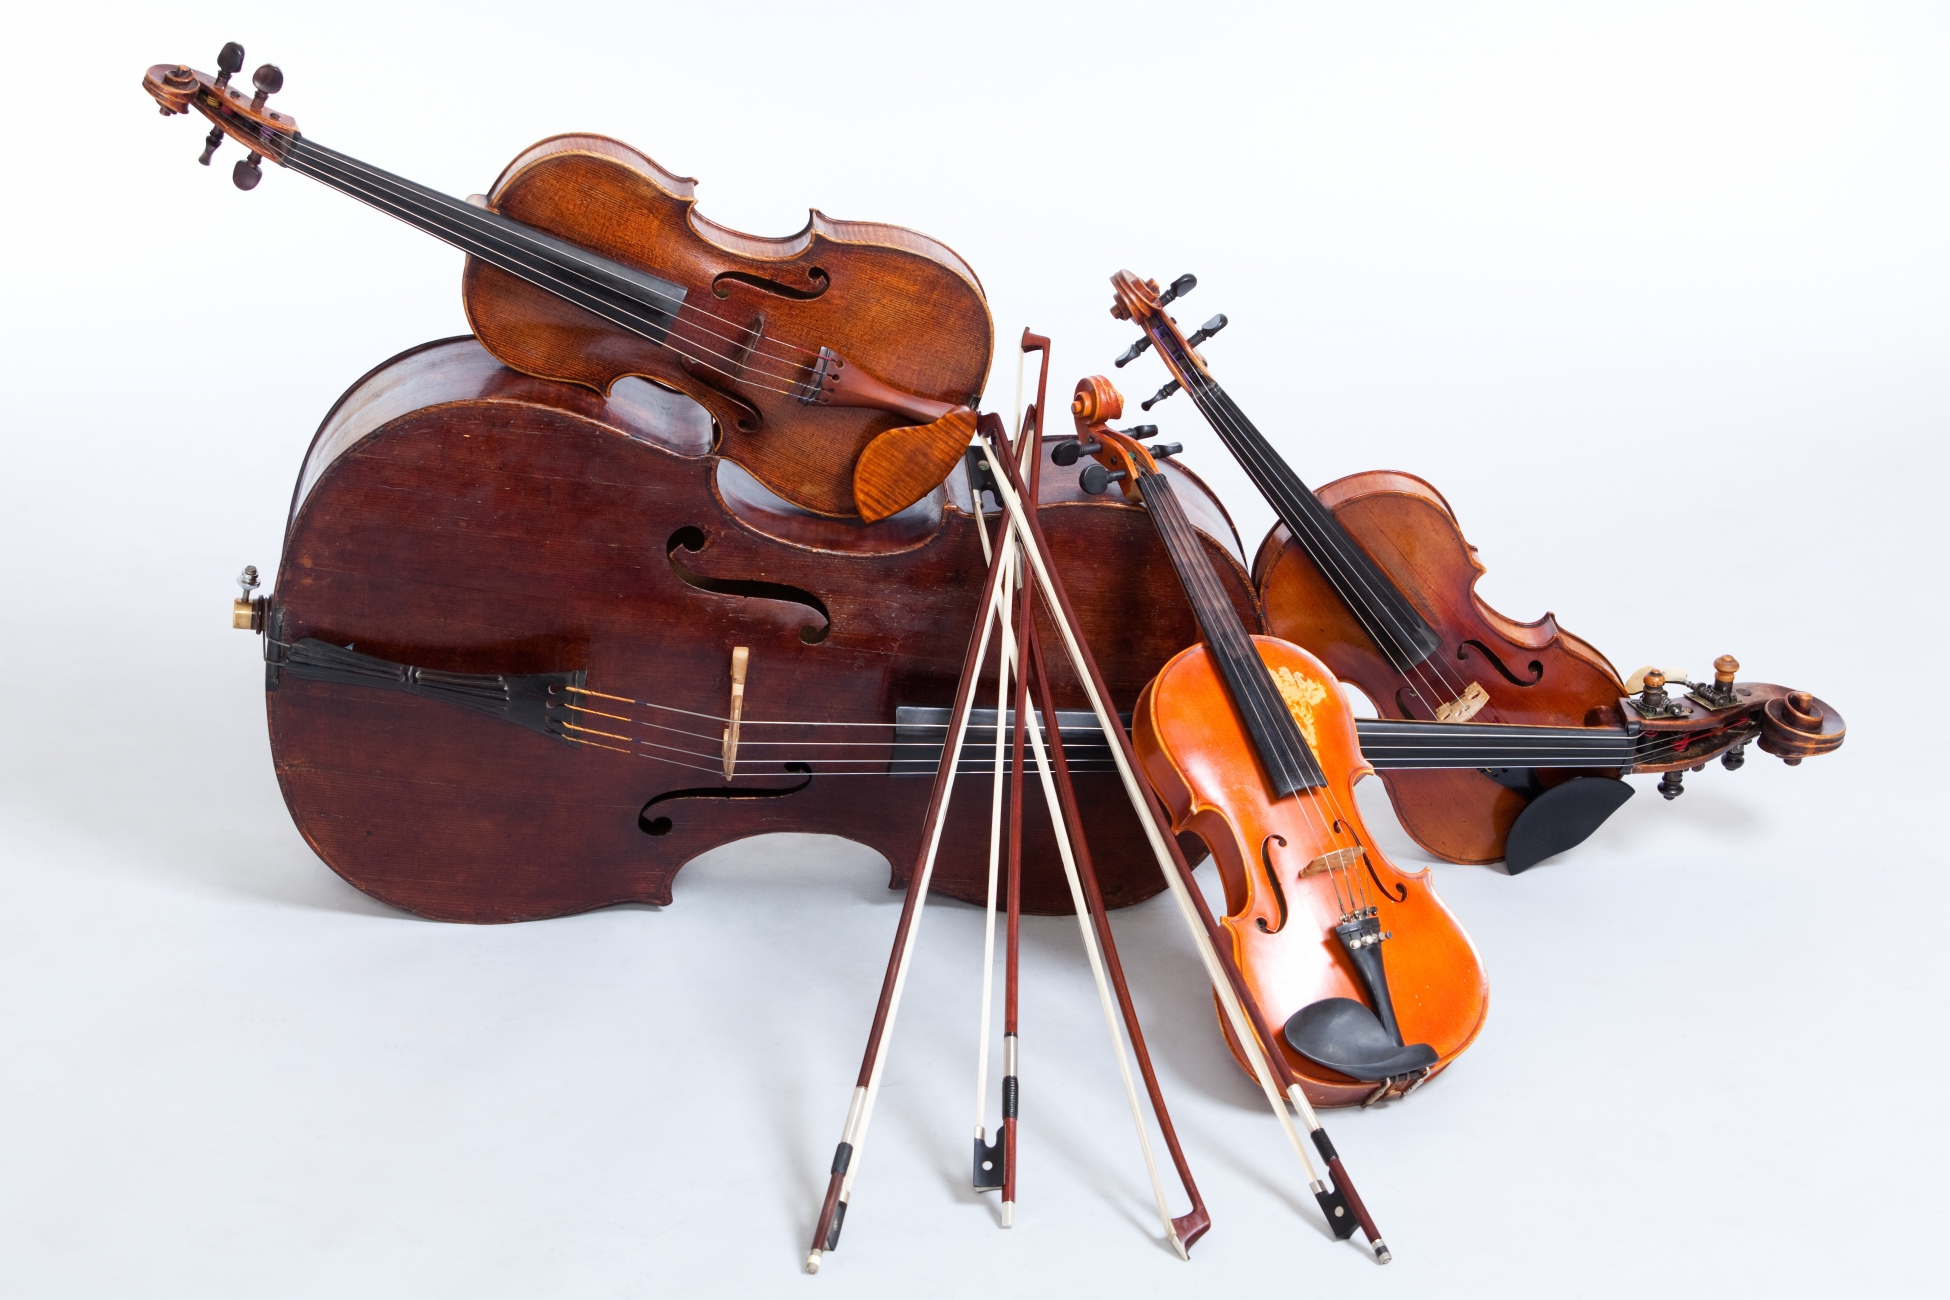 Image of string instruments resting against each other